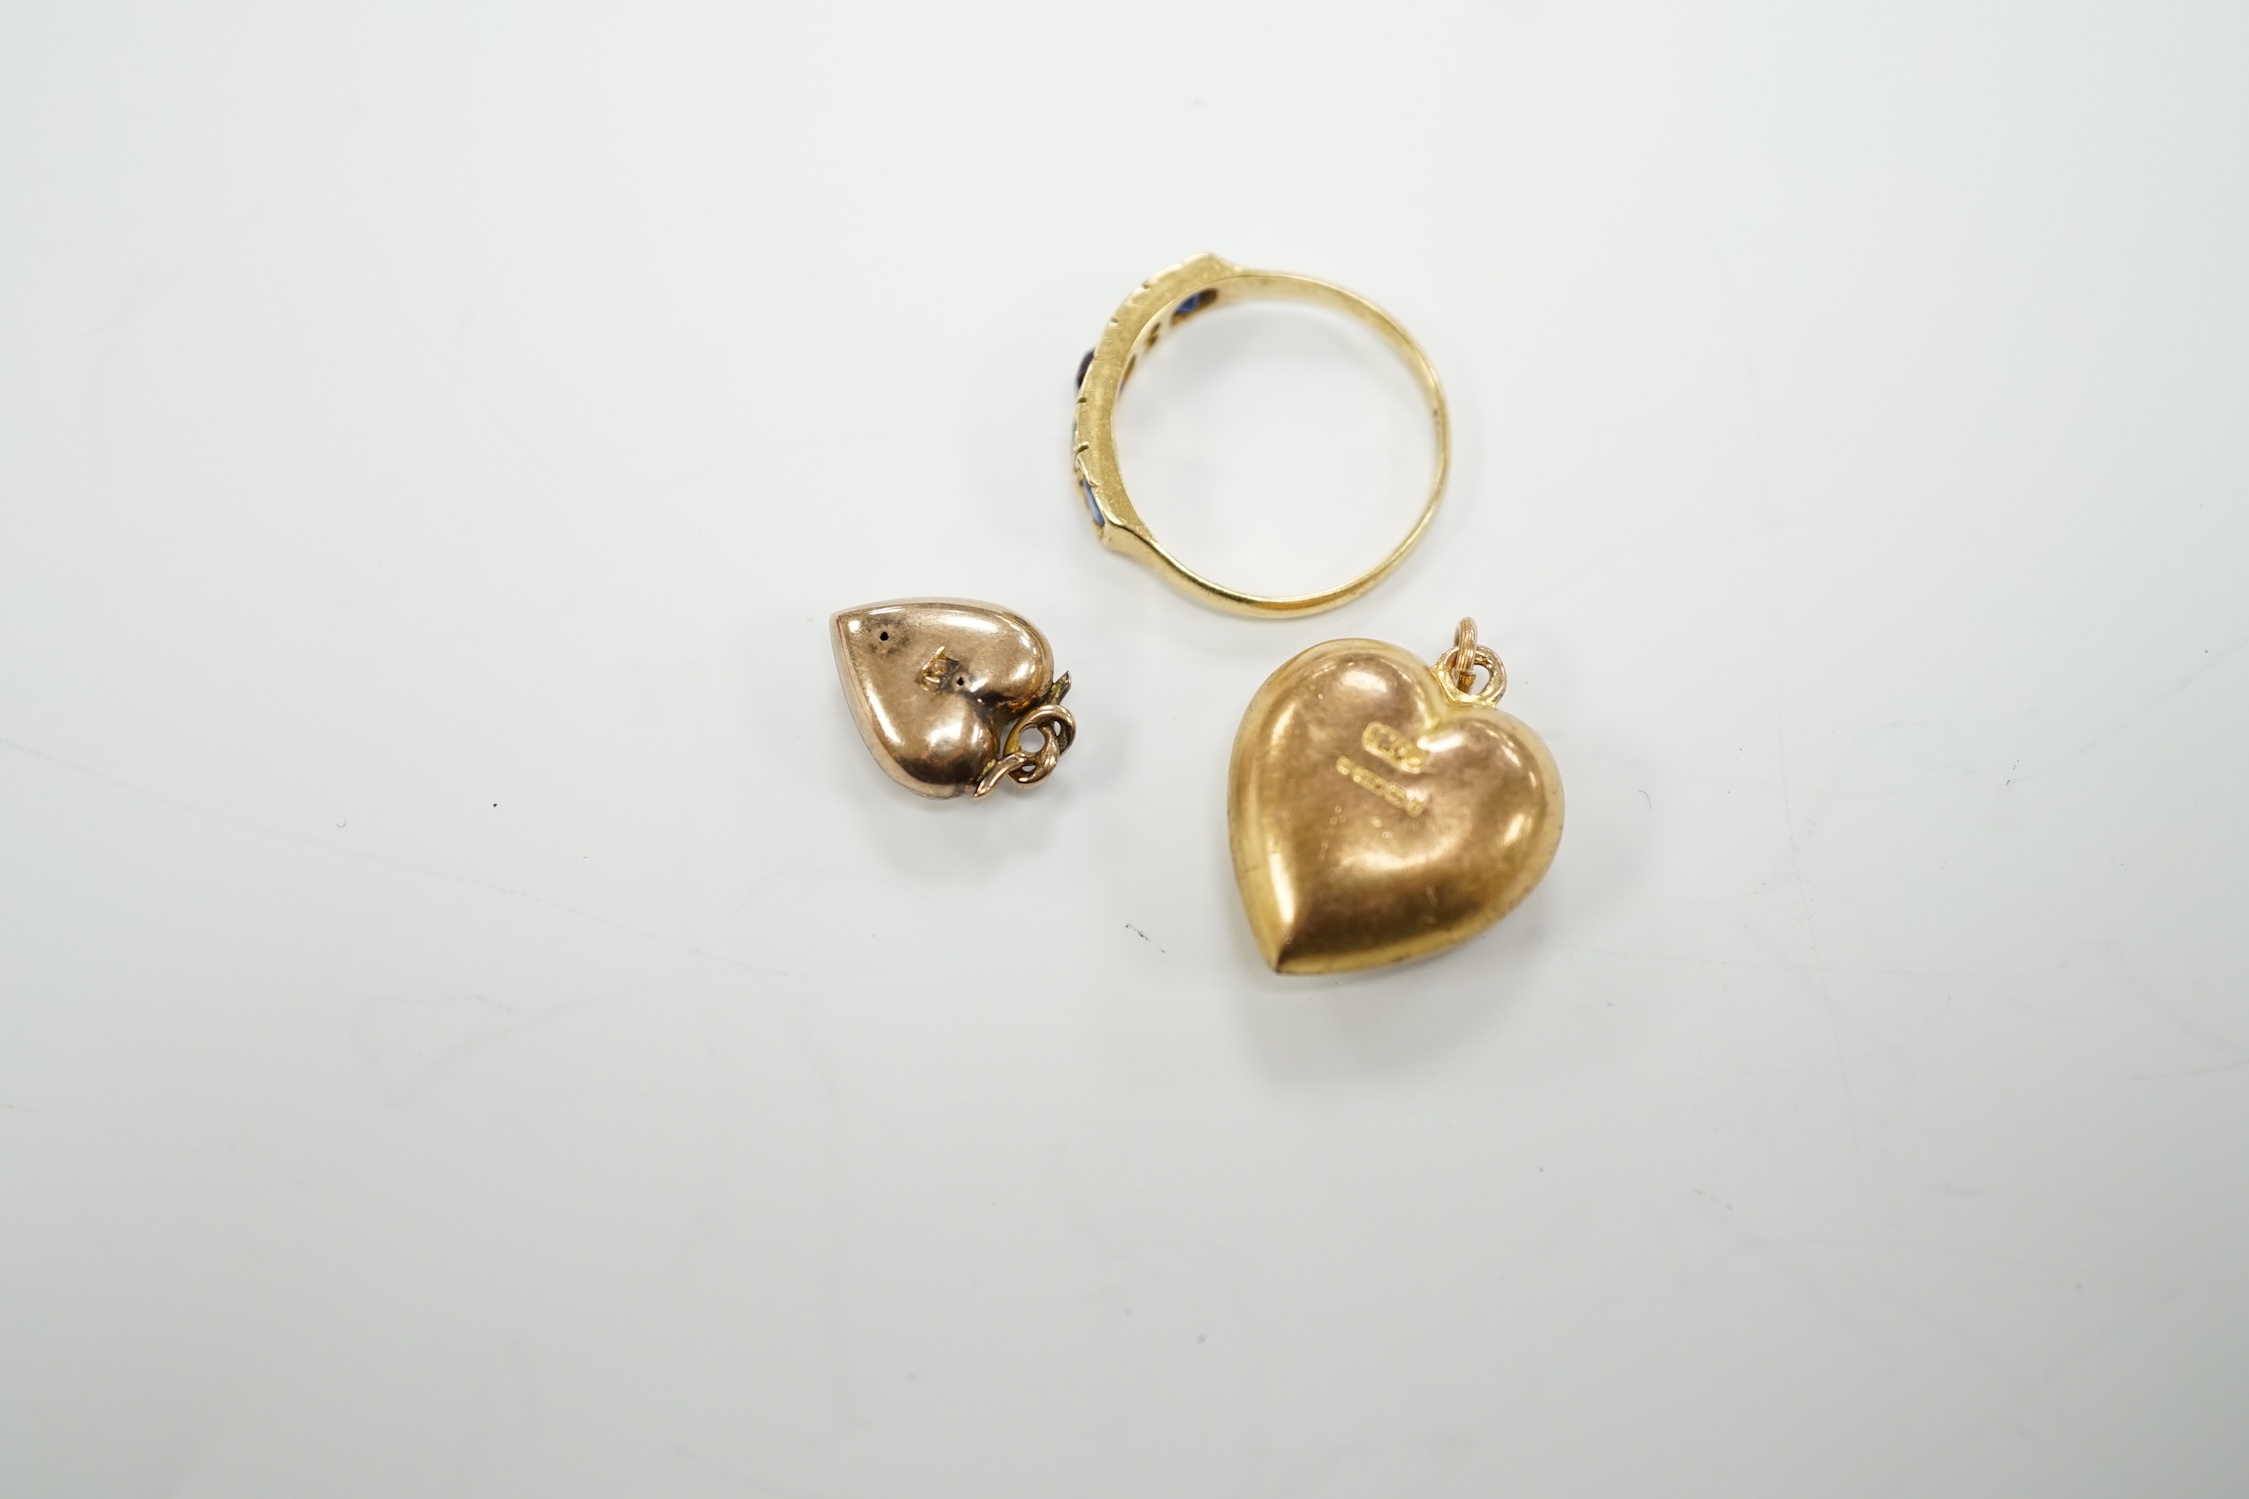 Two late Victorian 9ct and gem set heart pendants and an 18ct and gem set ring.